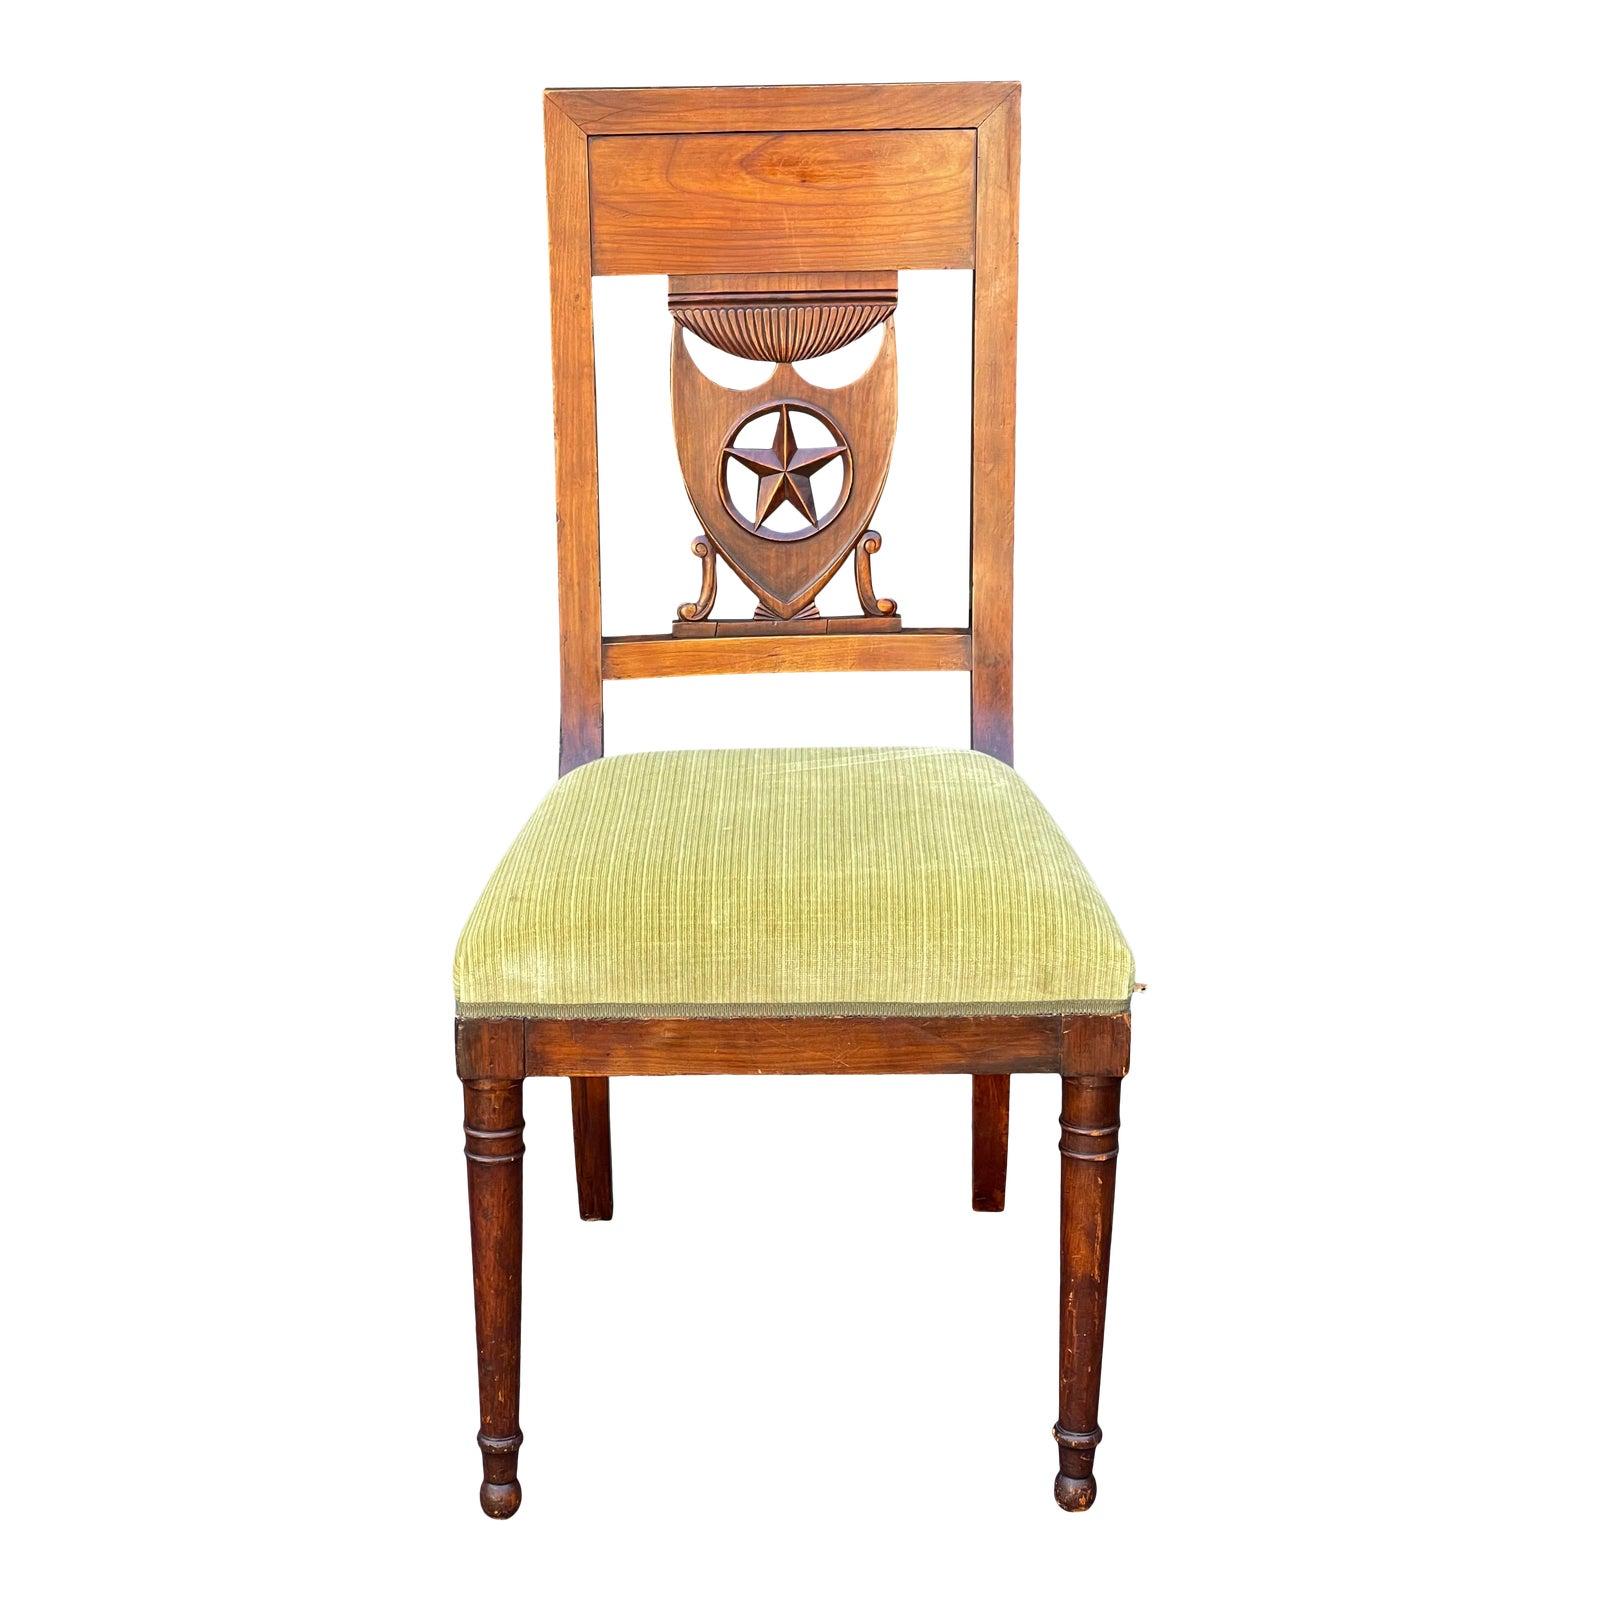 Antique 19th C Empire Star & Shield Coat of Arms Dining Chair For Sale